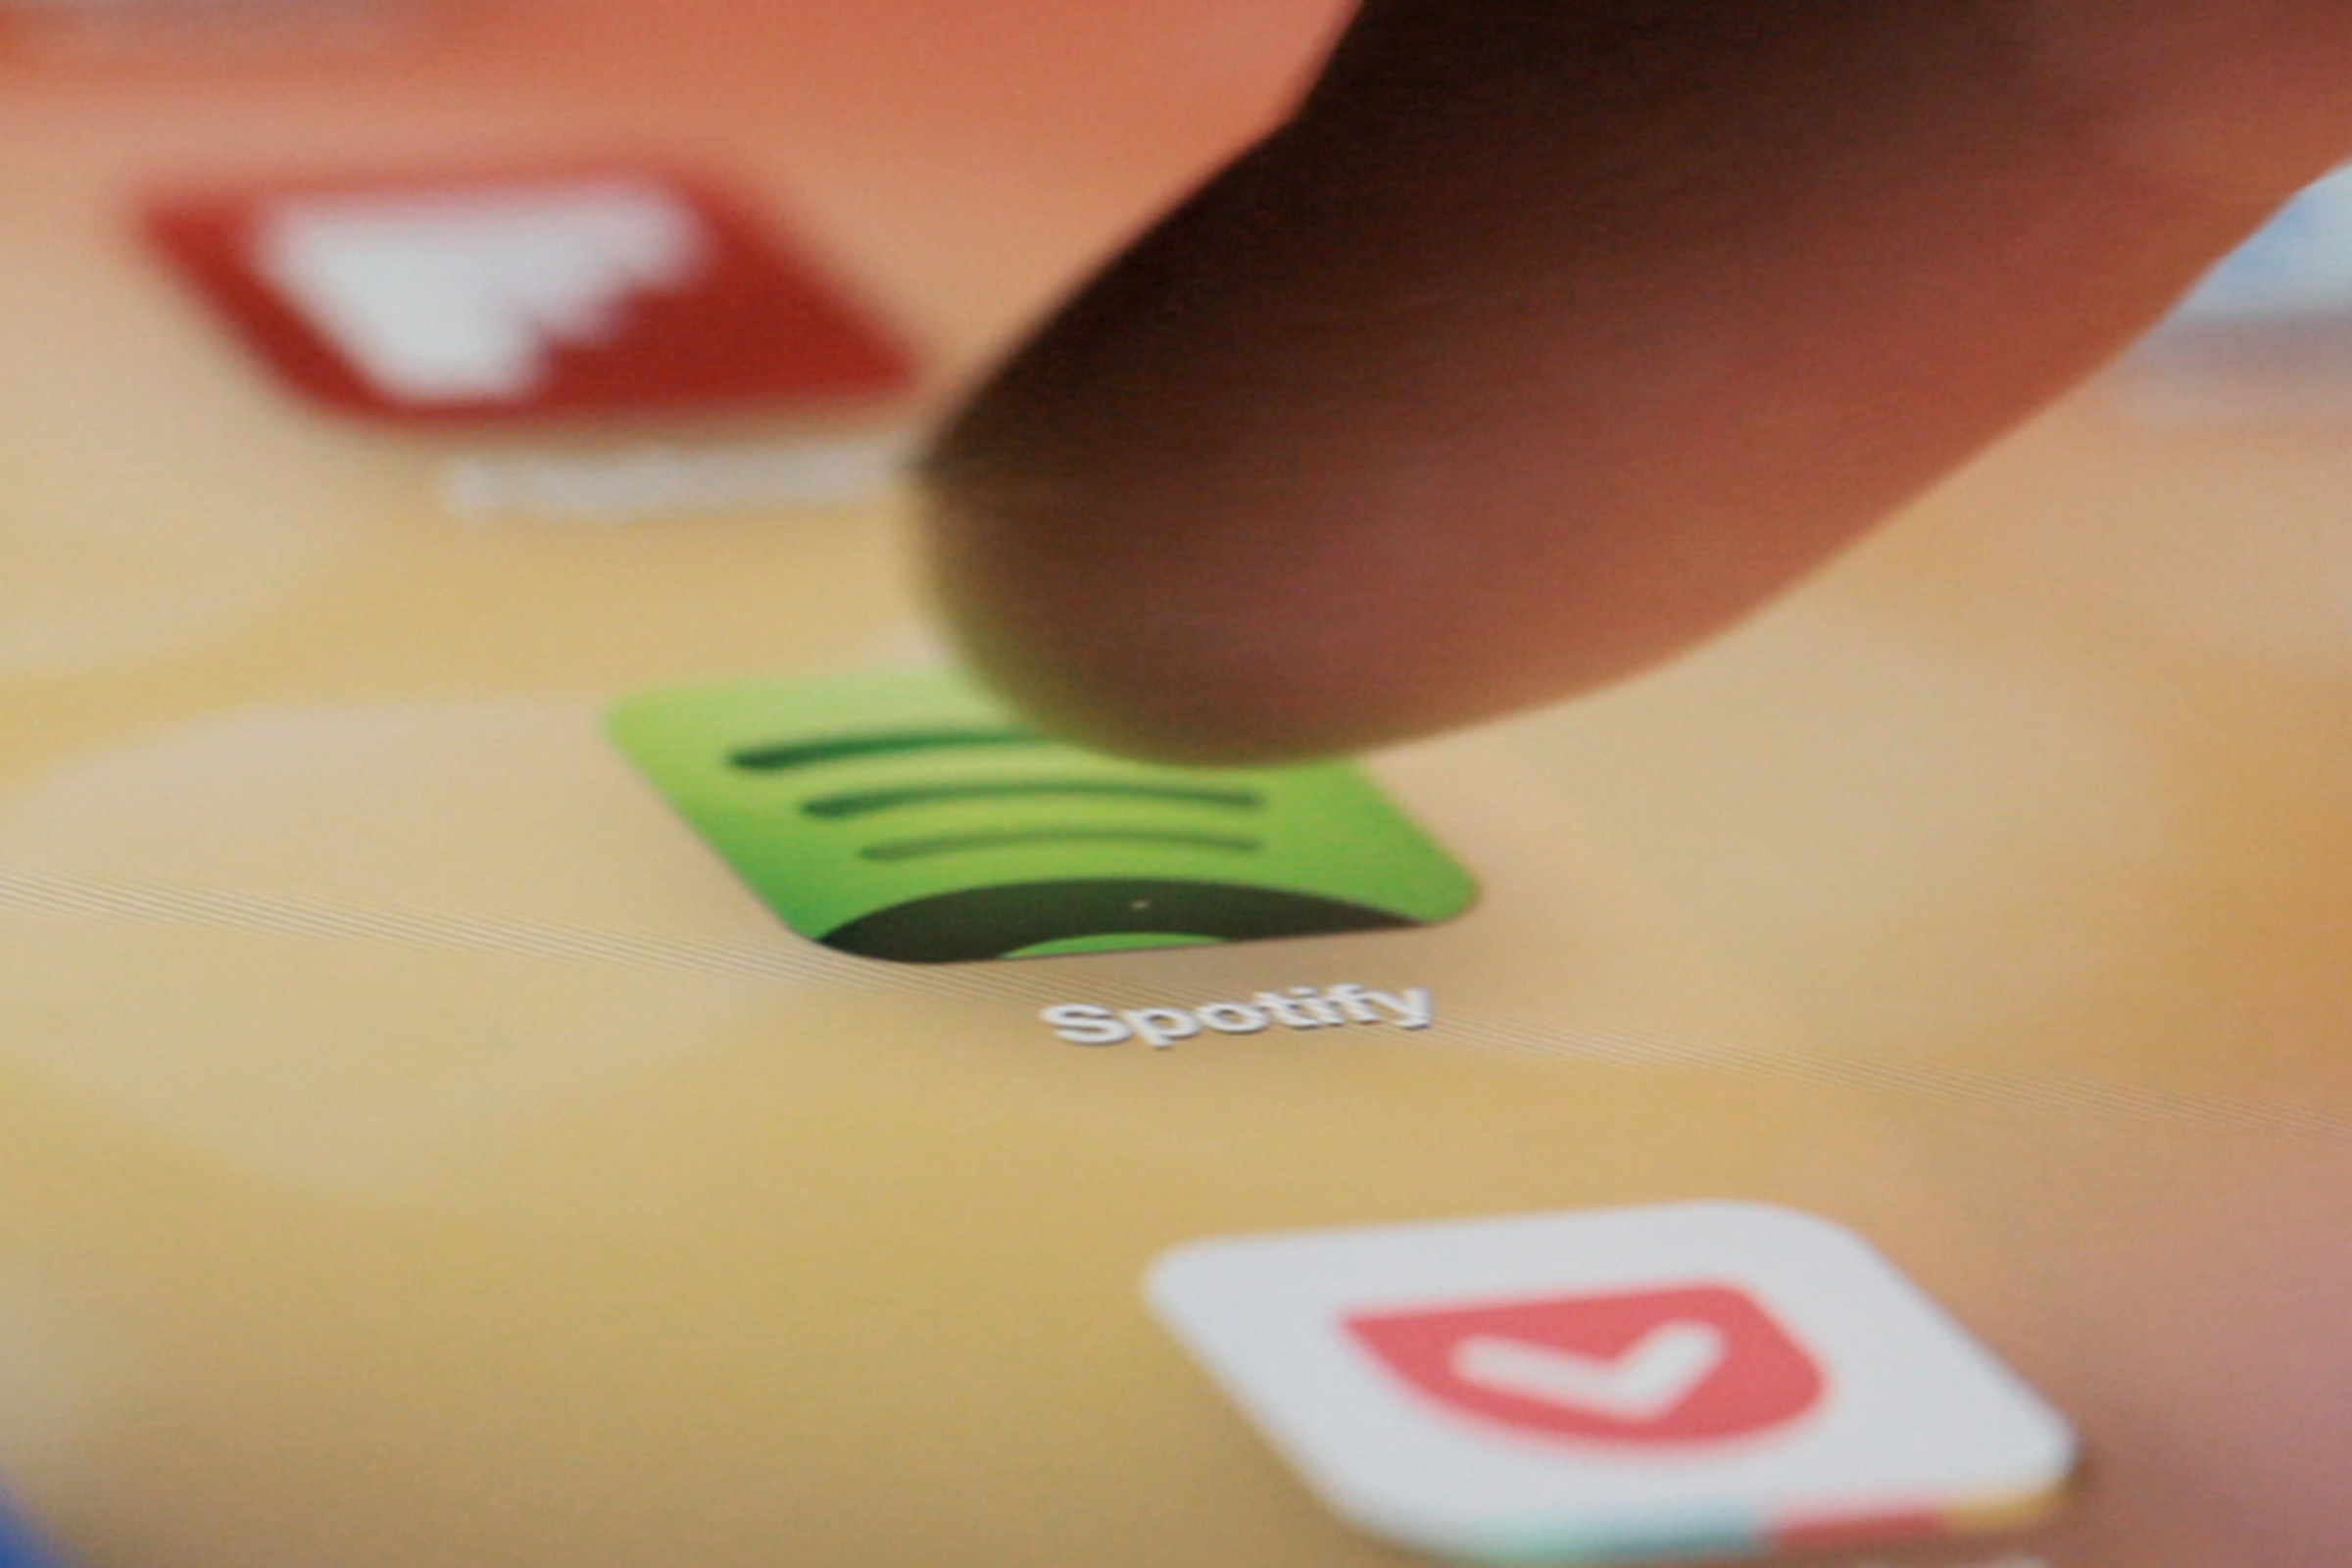 Spotify for iPad